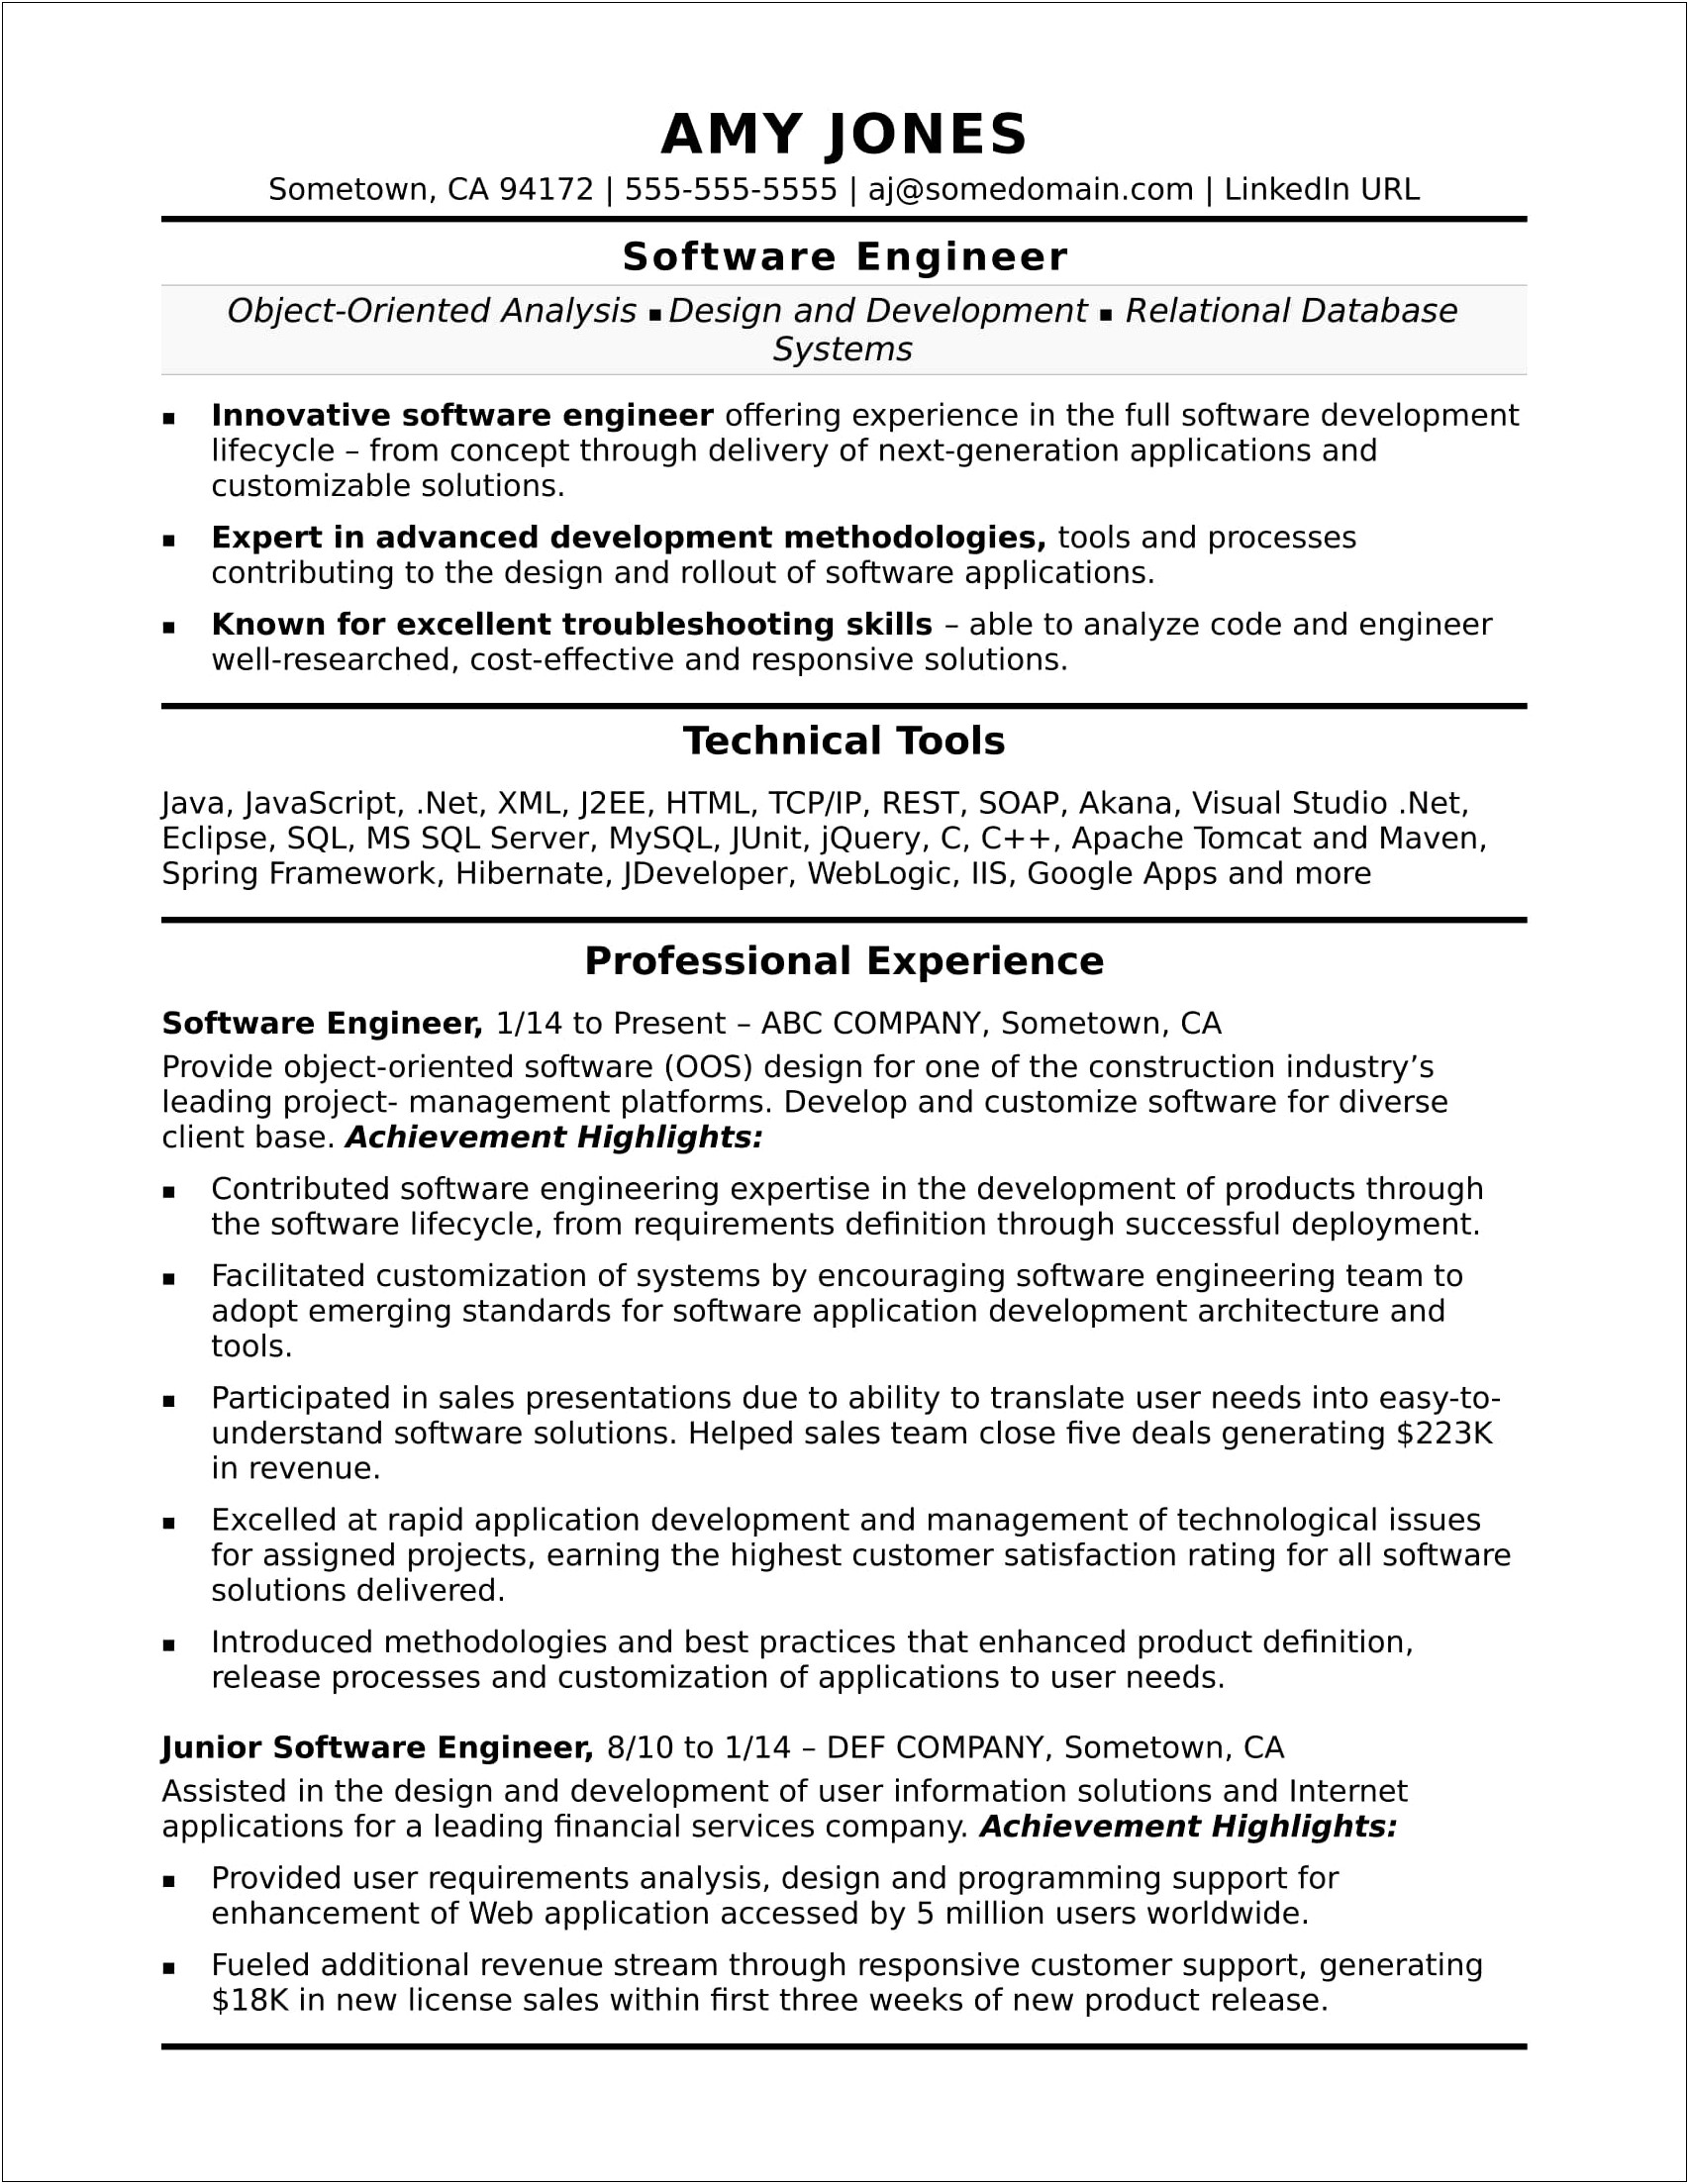 Sample Resume For 10 Years Experience Engineer